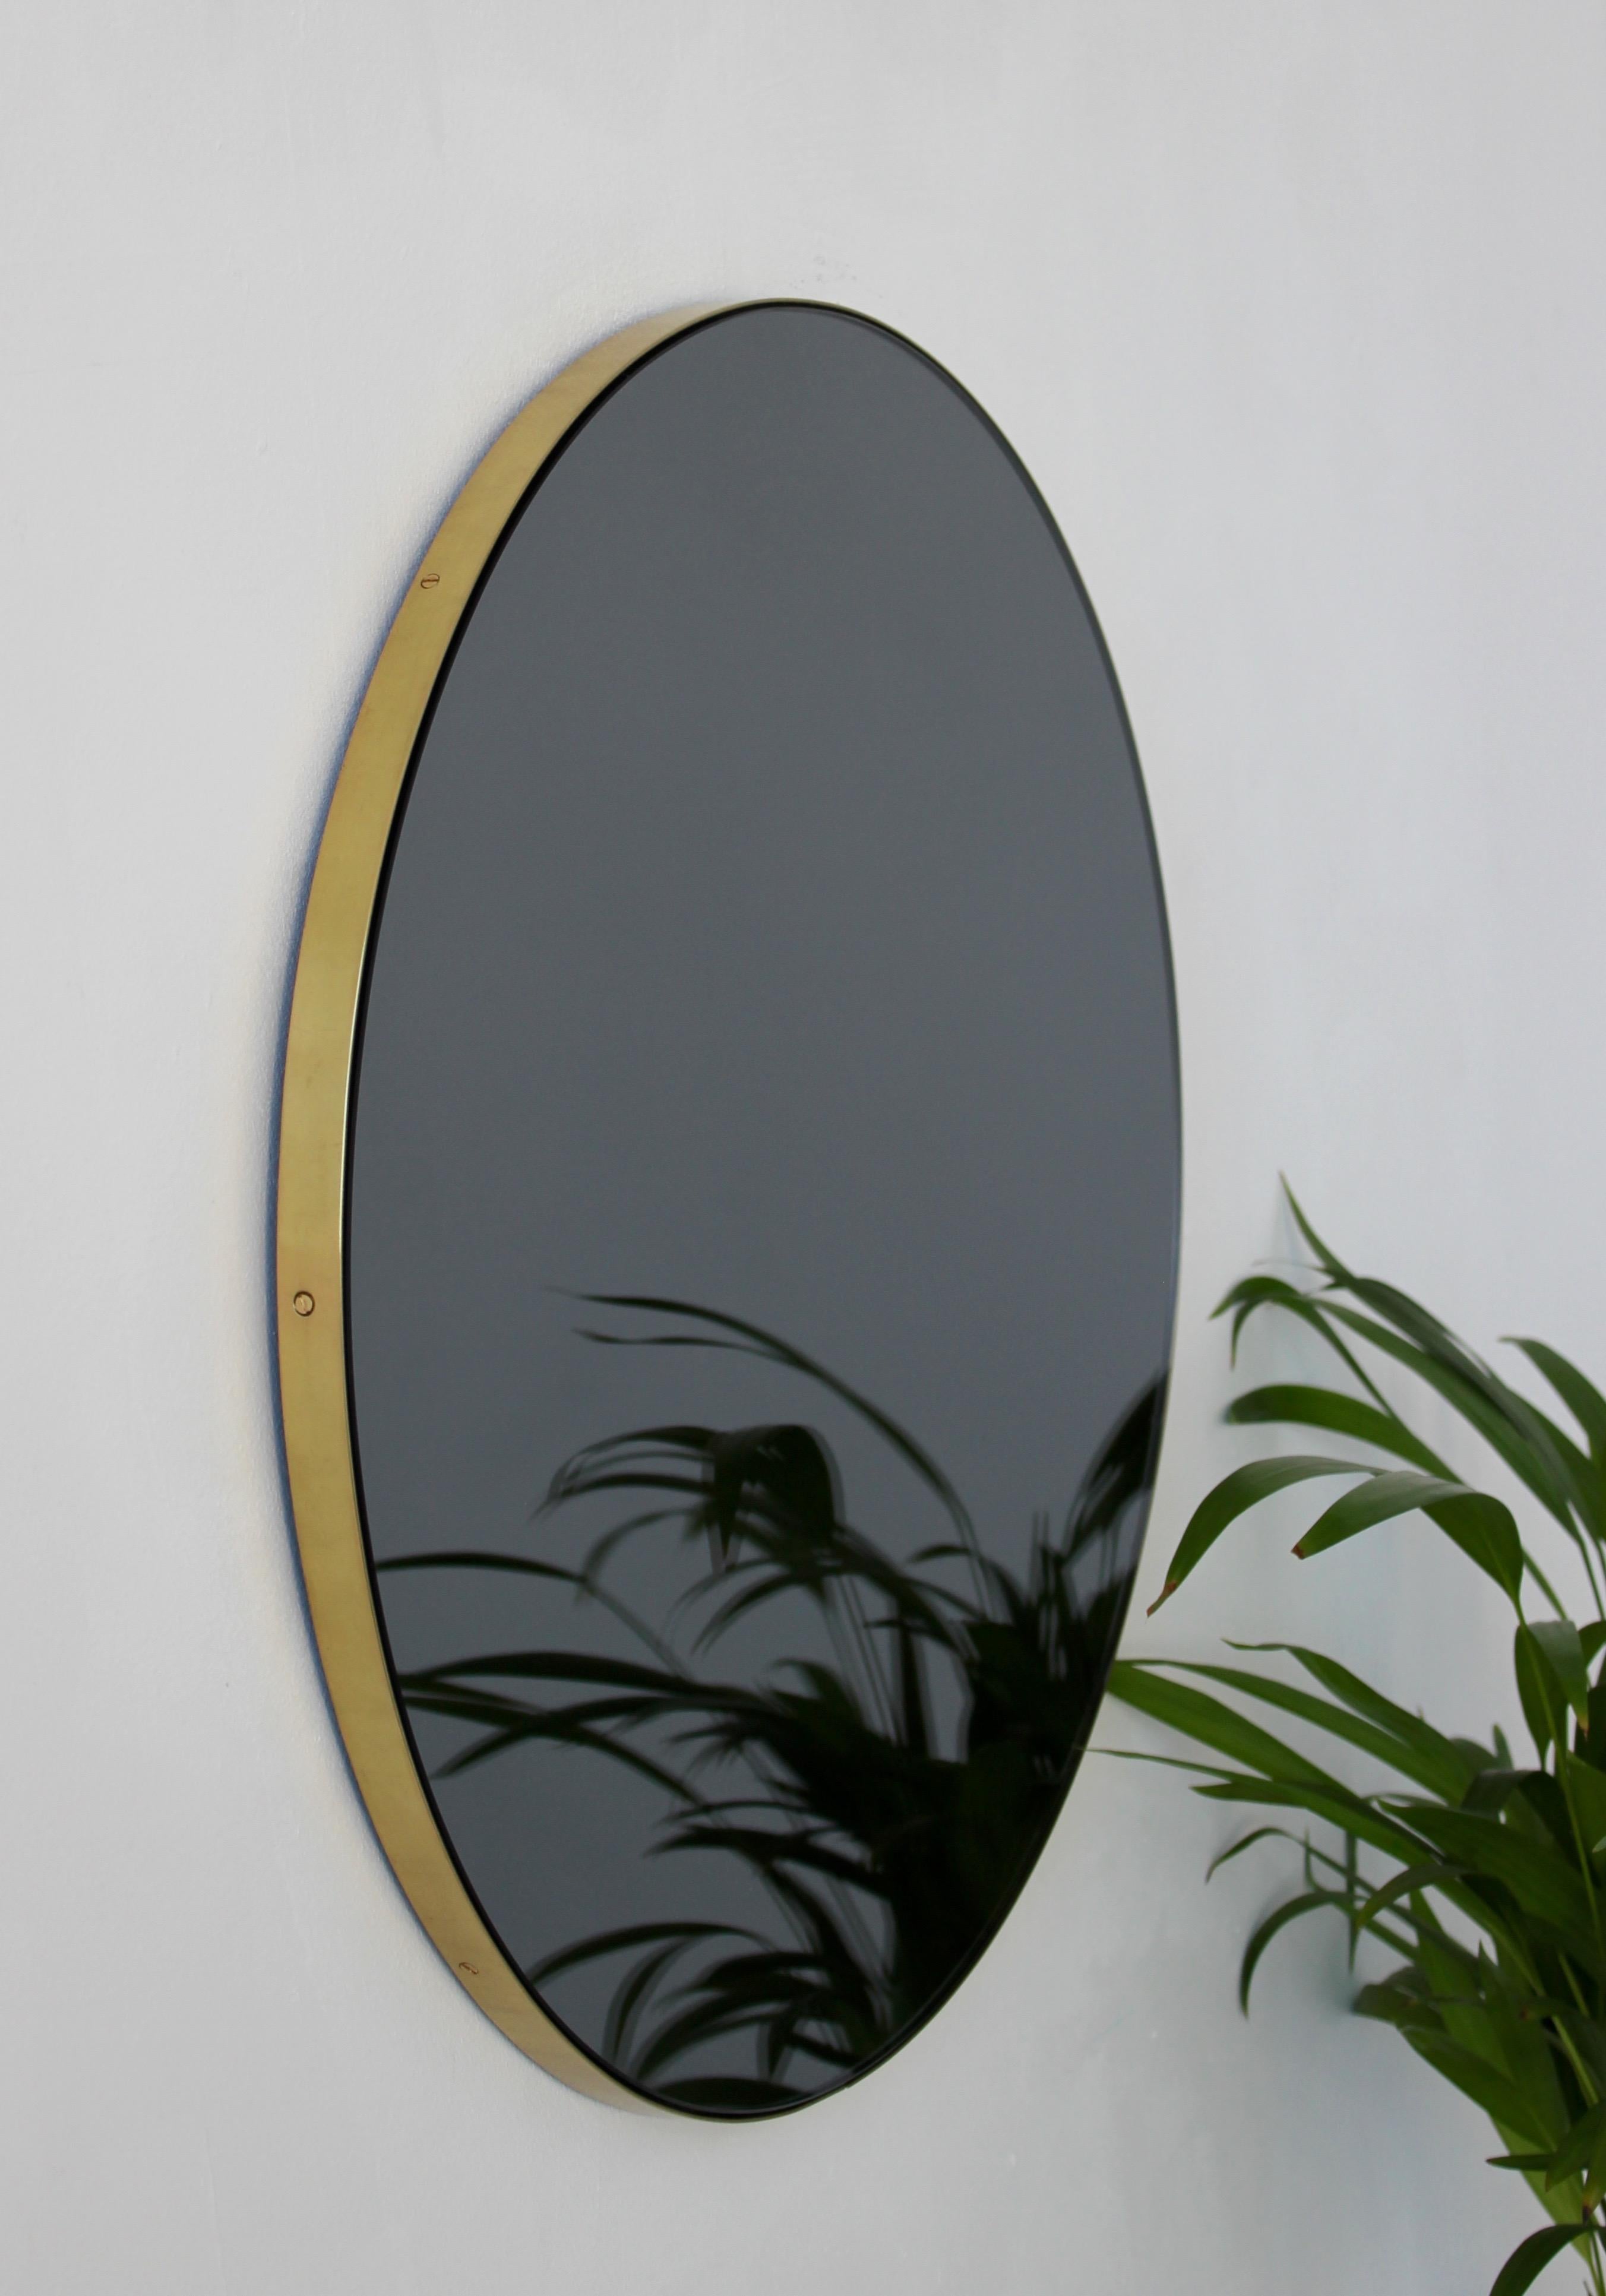 Brushed Orbis Black Tinted Round Contemporary Mirror with a Brass Frame, Medium For Sale